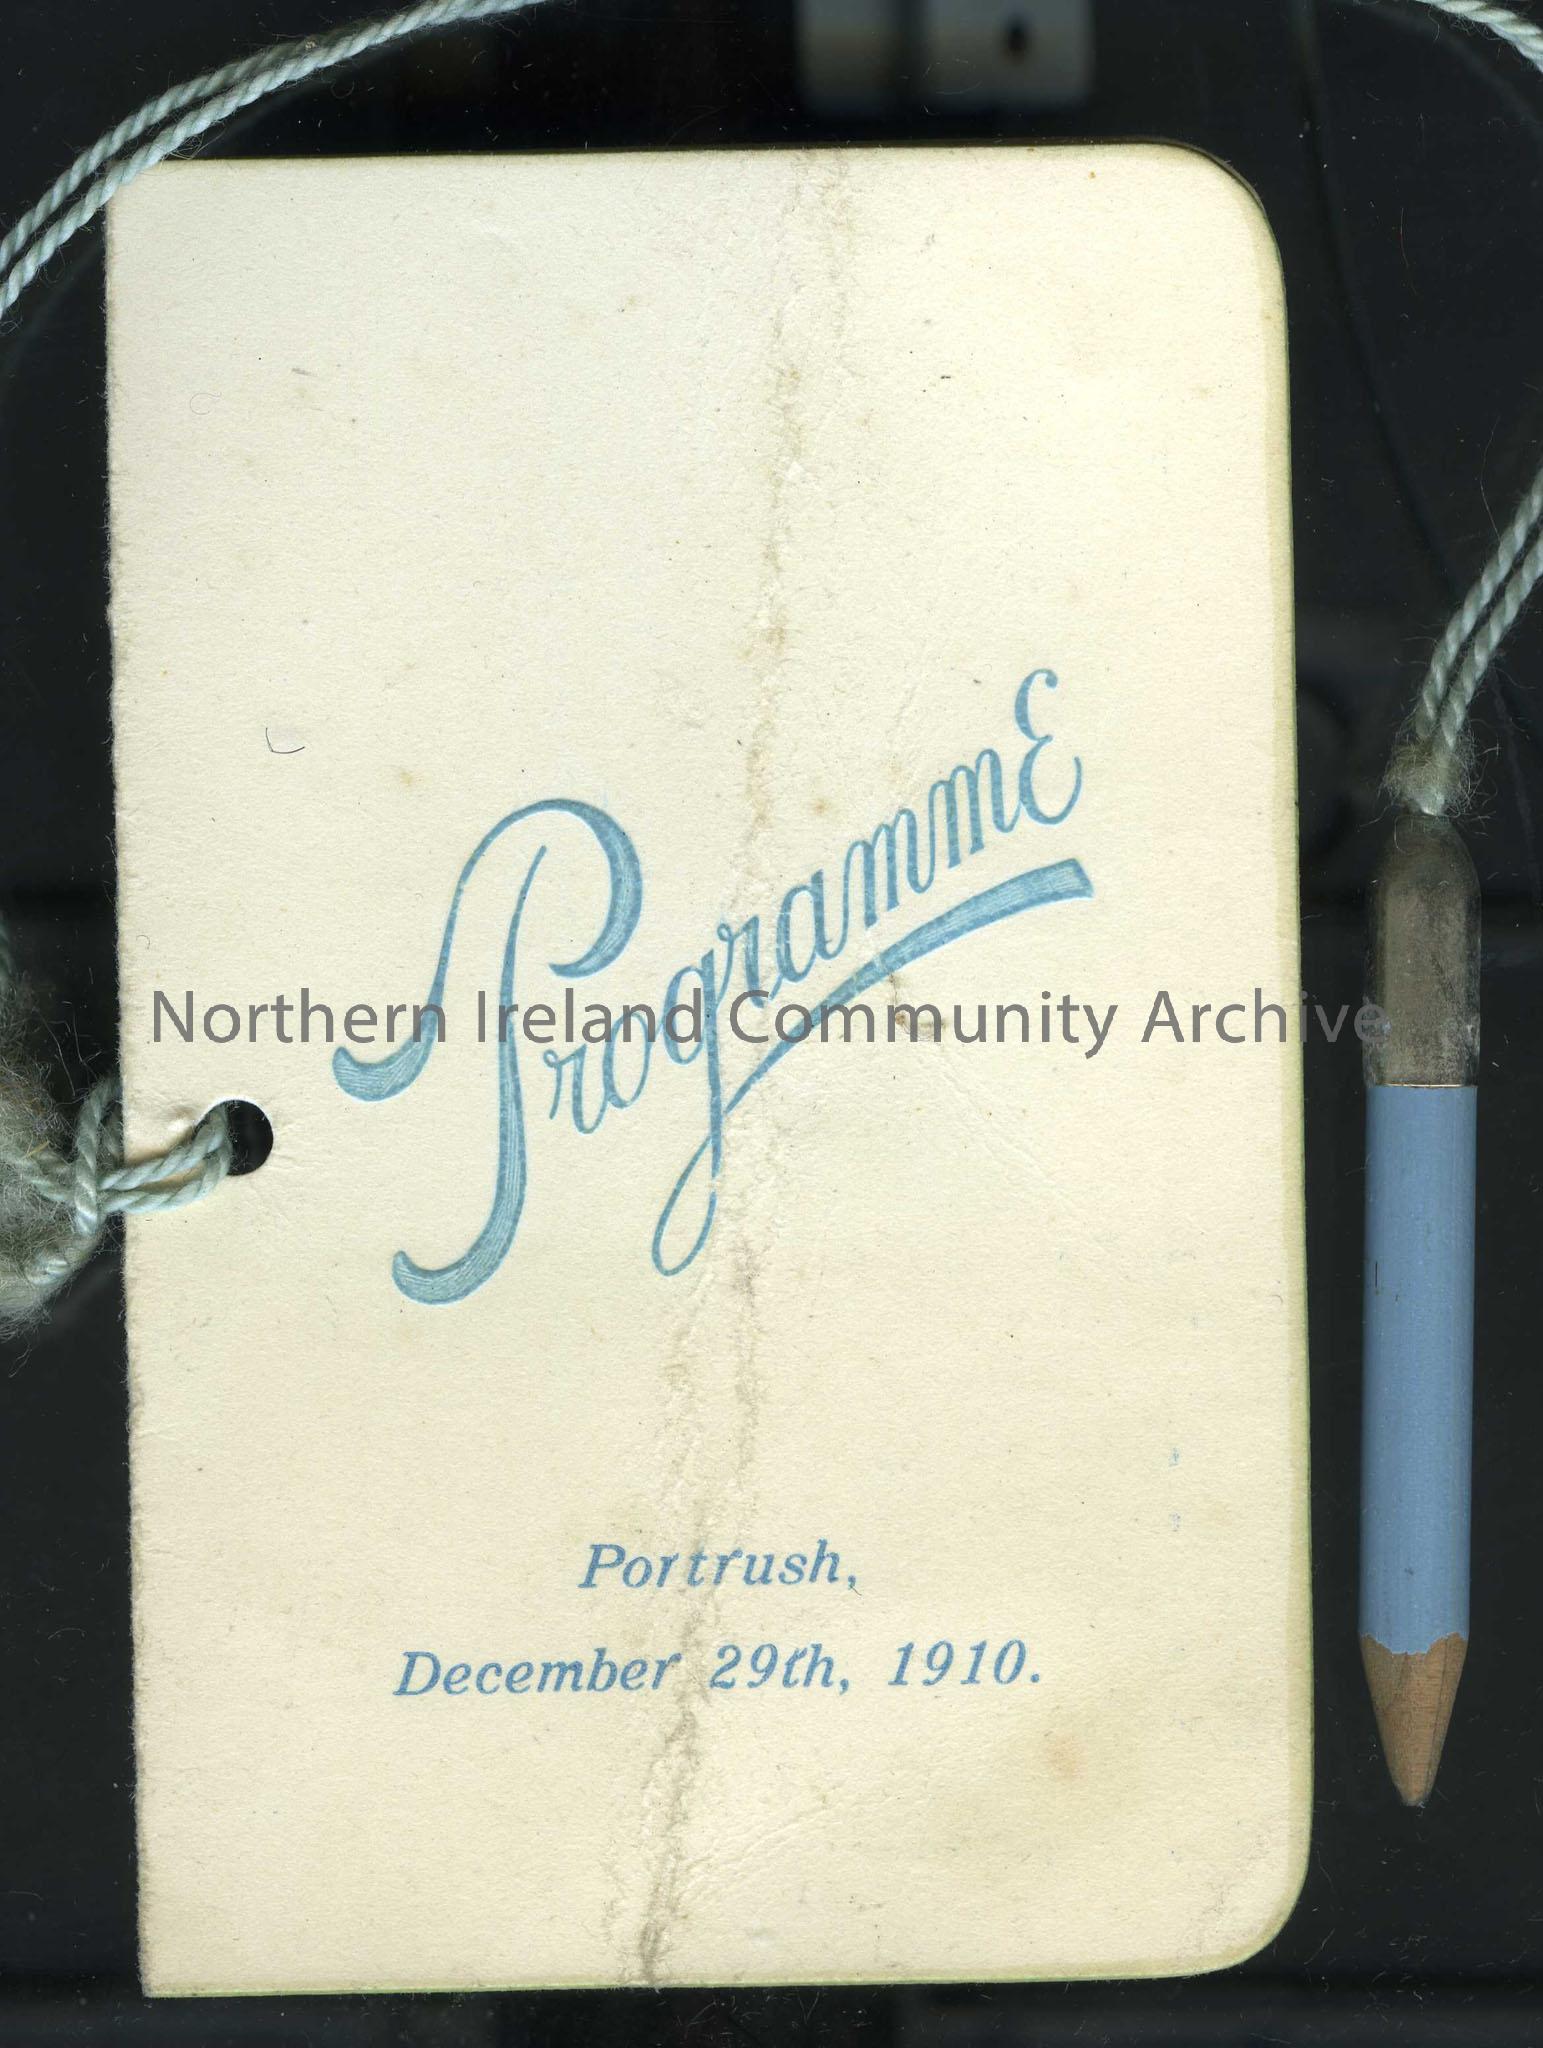 Dance card or programme.  Portrush, December 29th, 1910 on front.  Names inside and pencil attached.